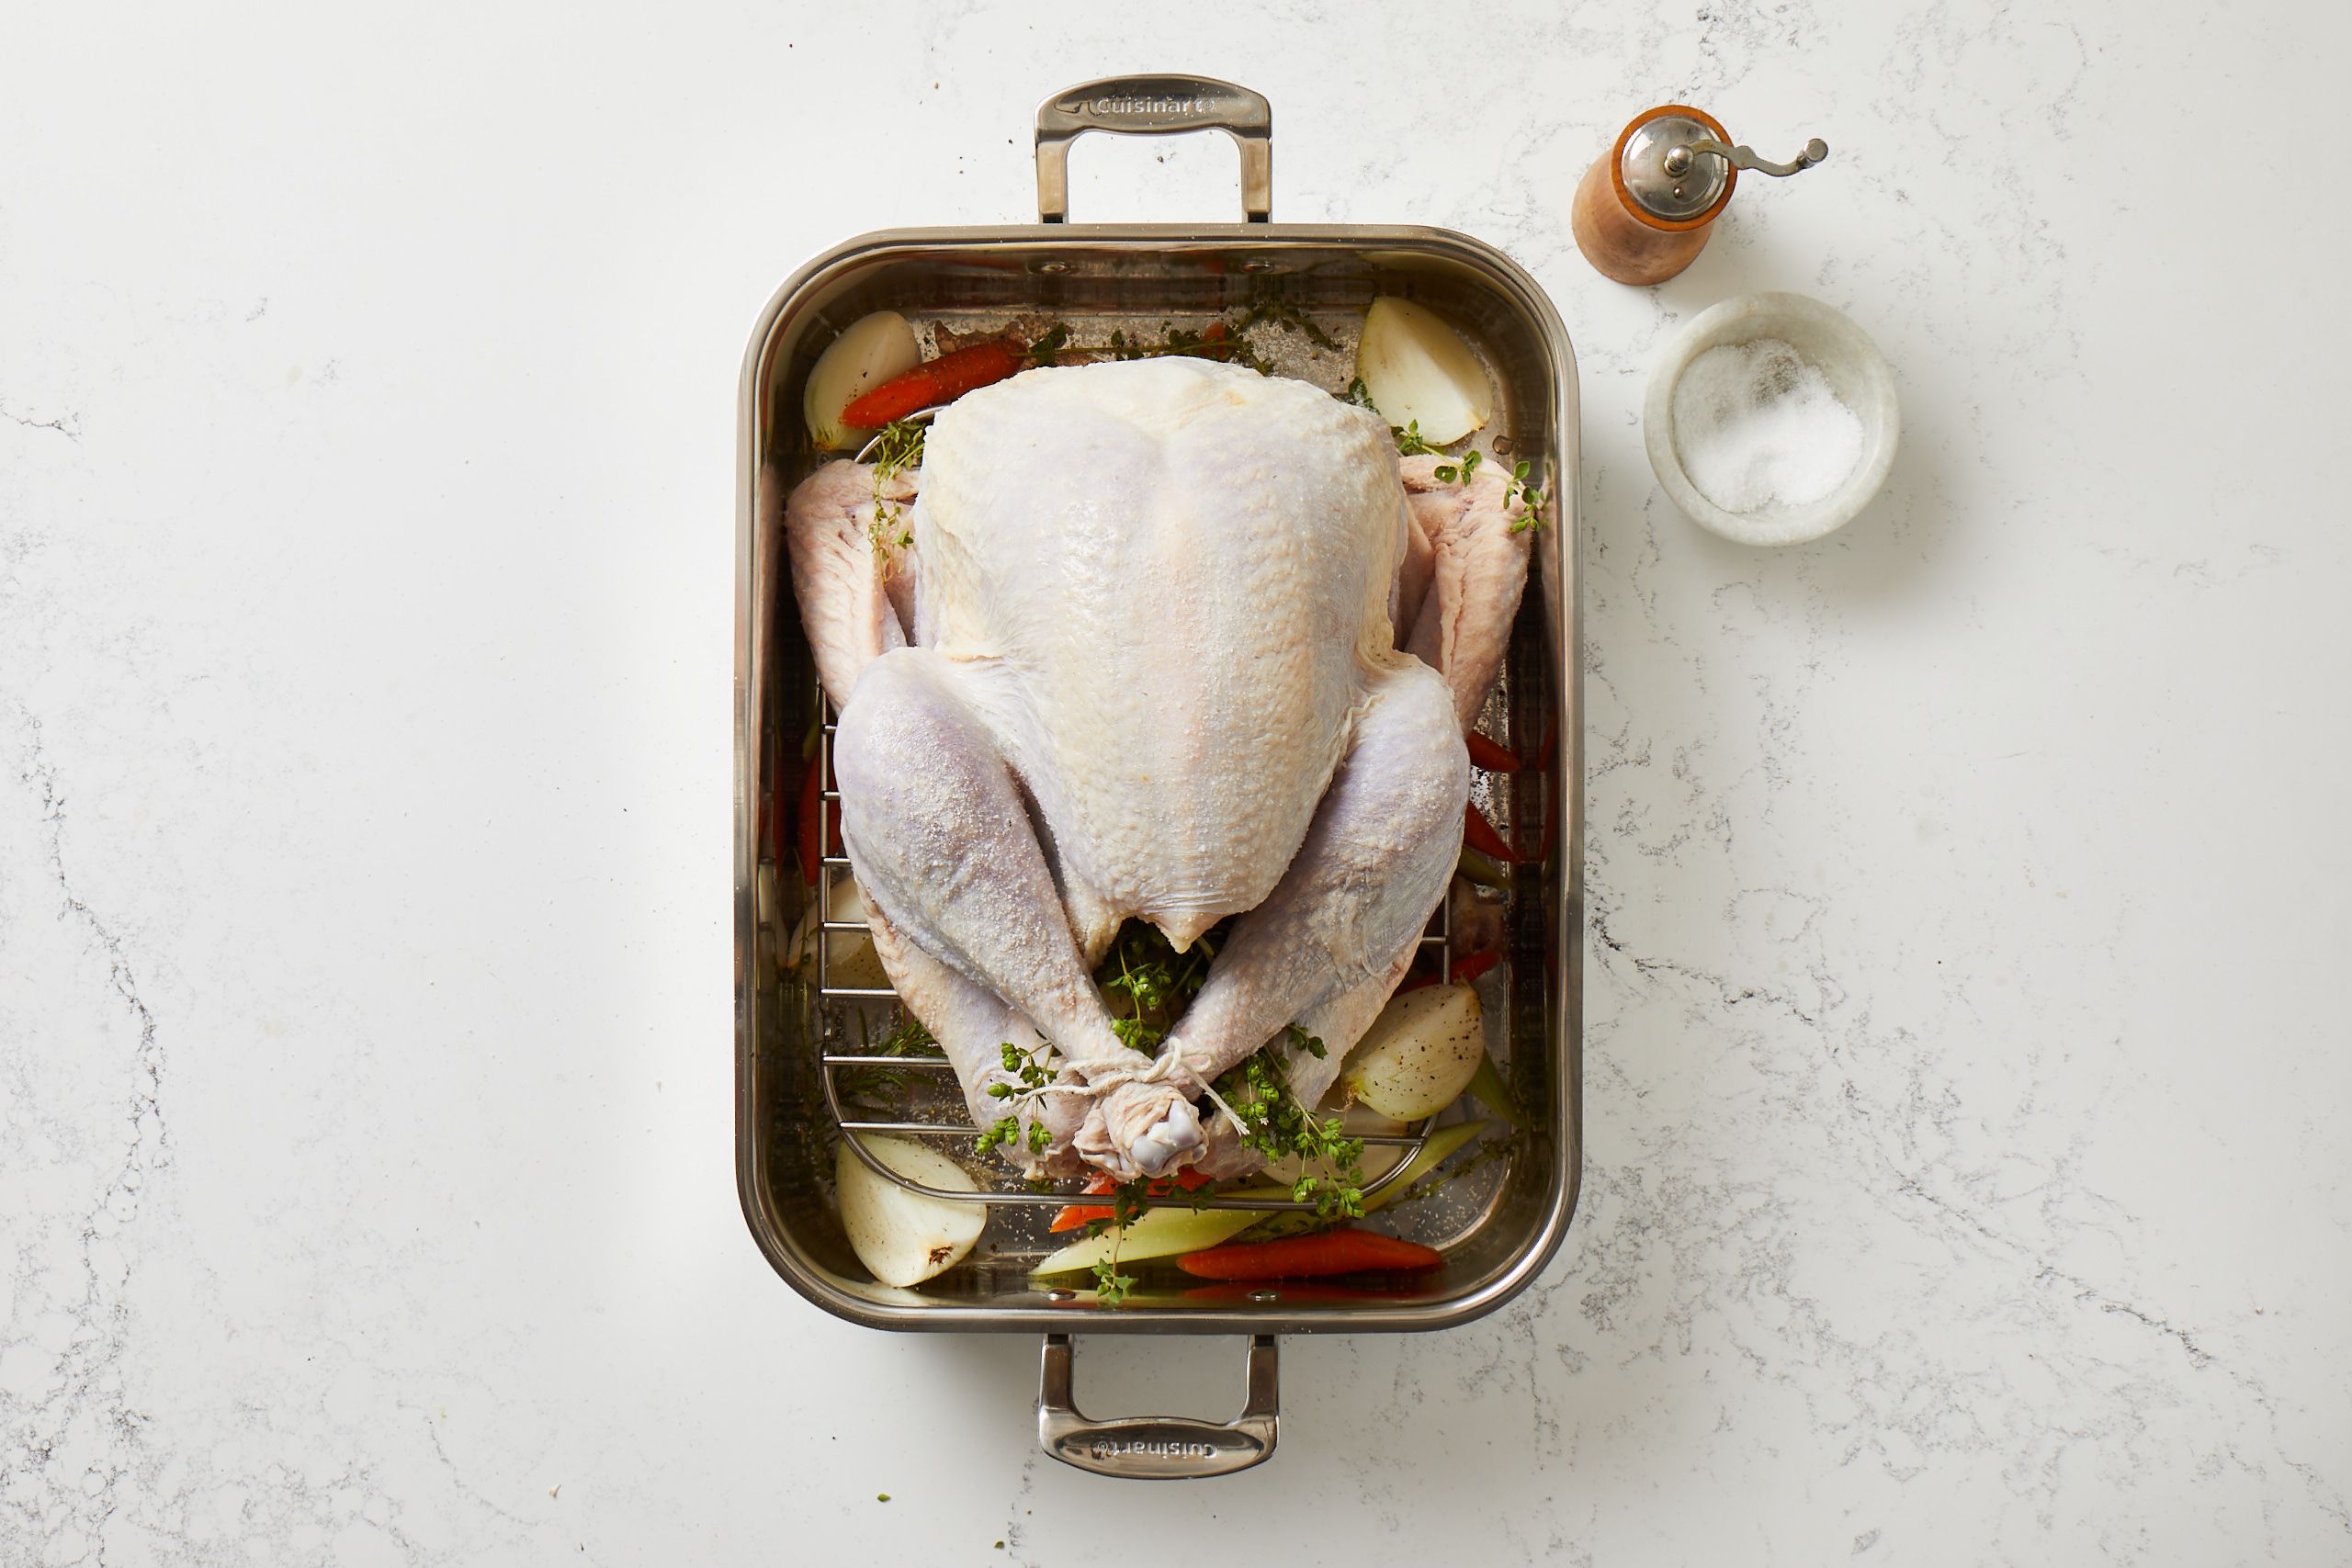 The Best {and easiest} Way To Cook A Perfect Turkey. Every Time